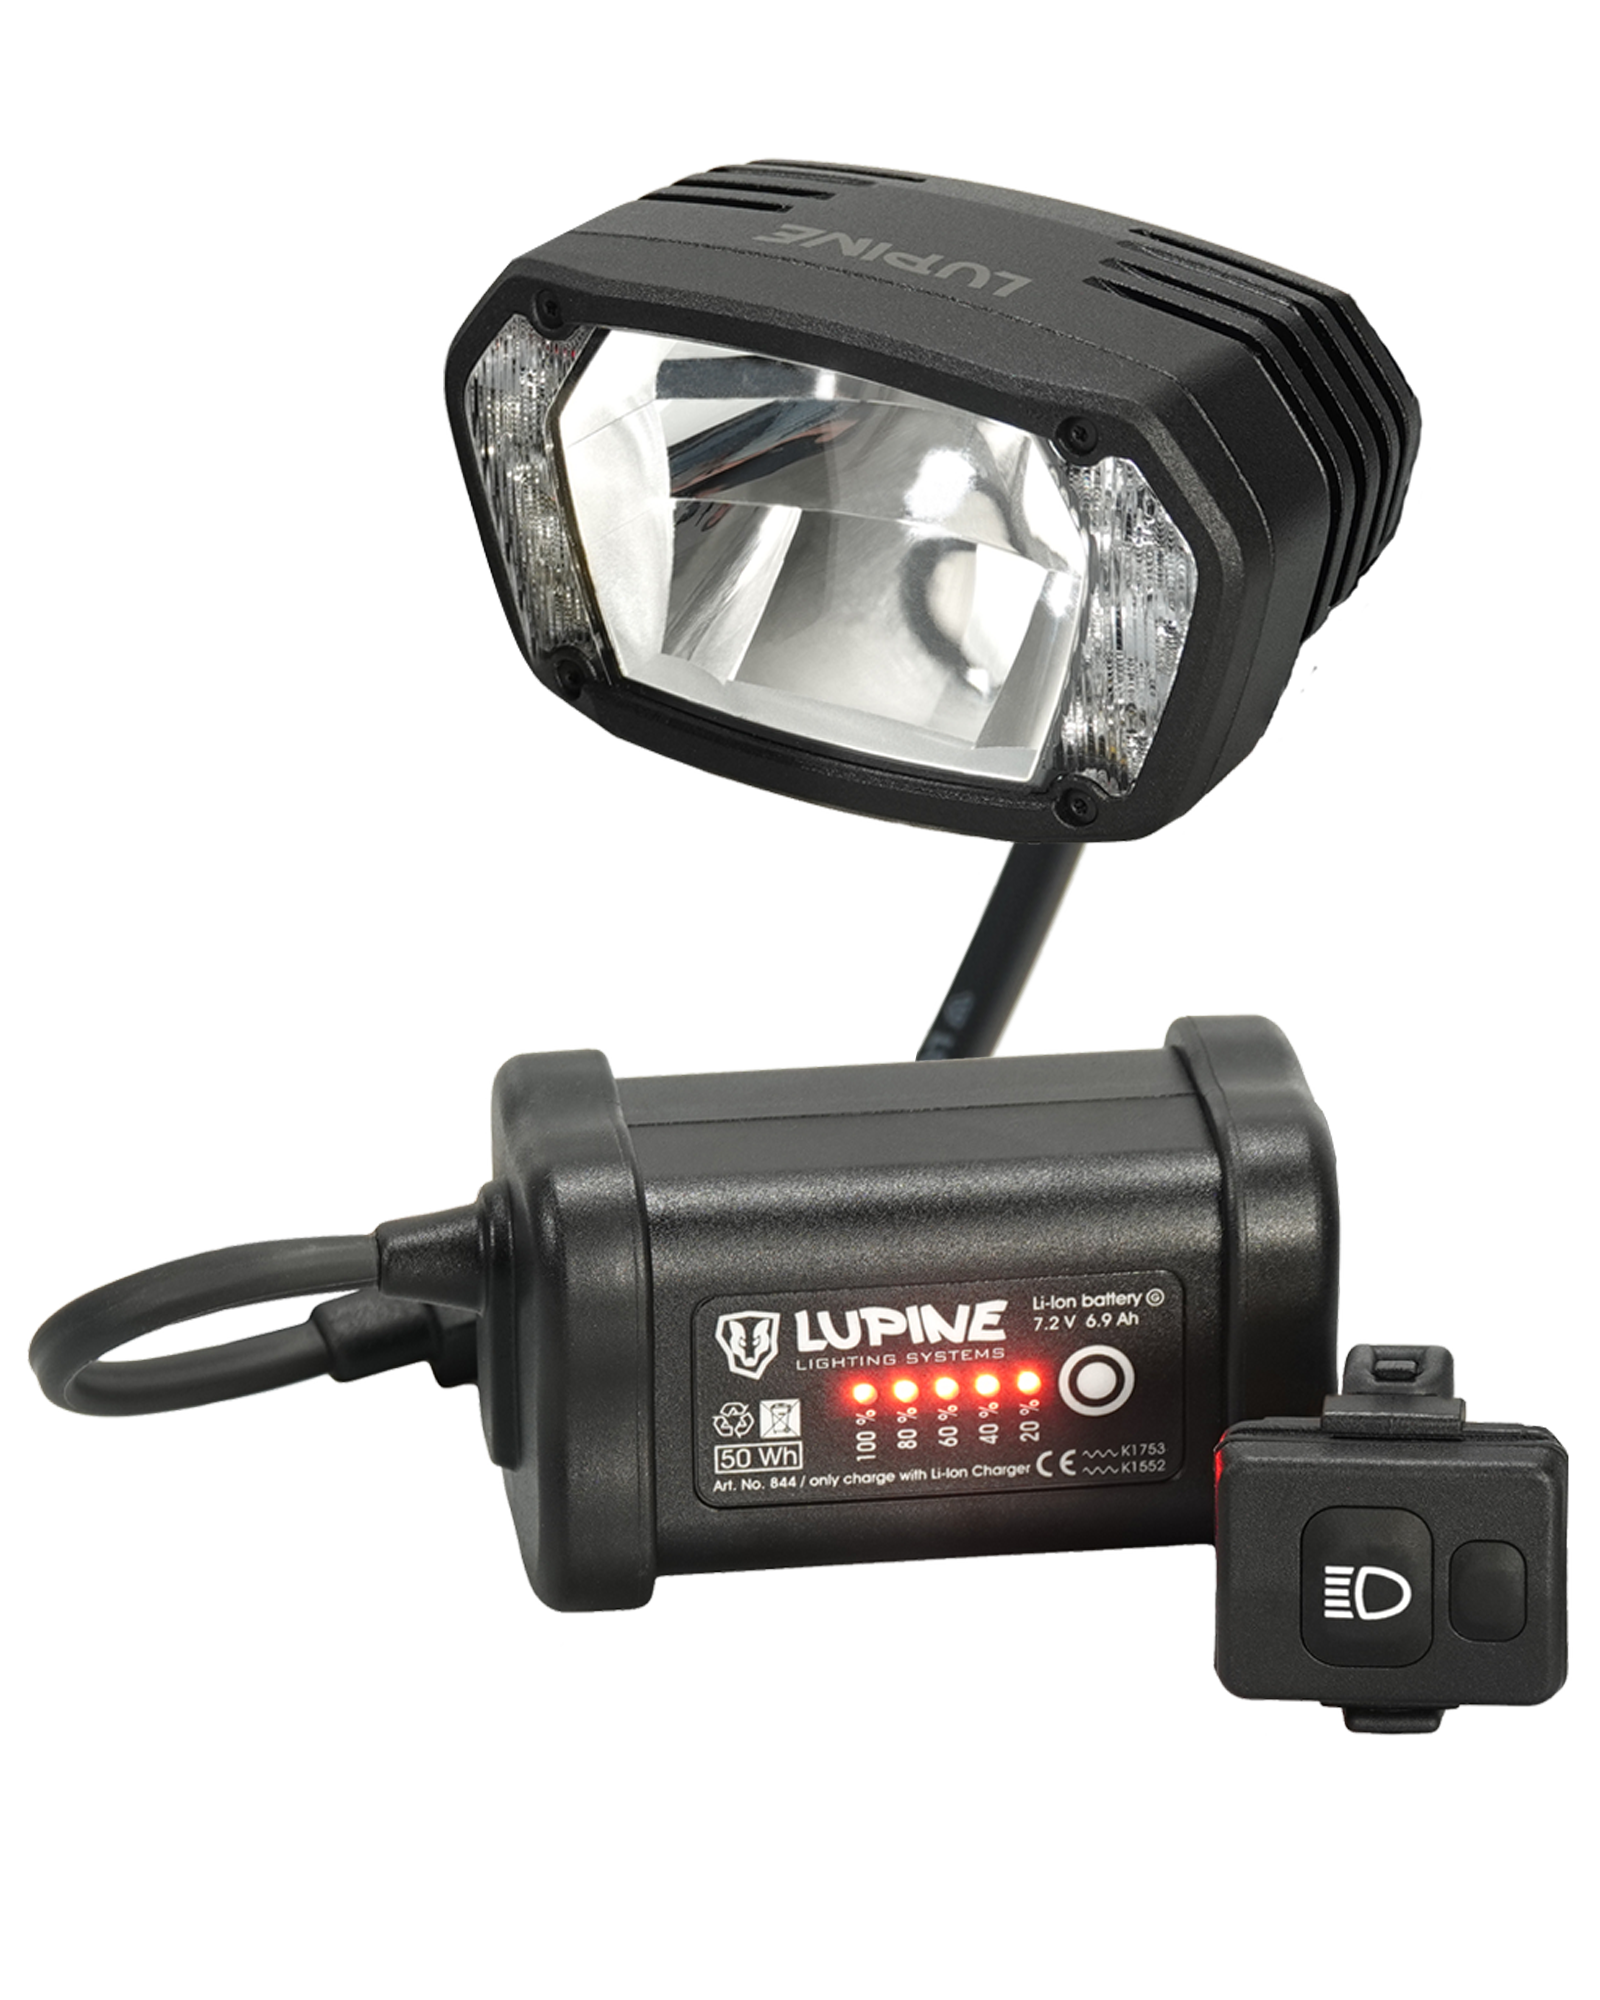 Lupine SL AX Canyon StVZO Front Light |